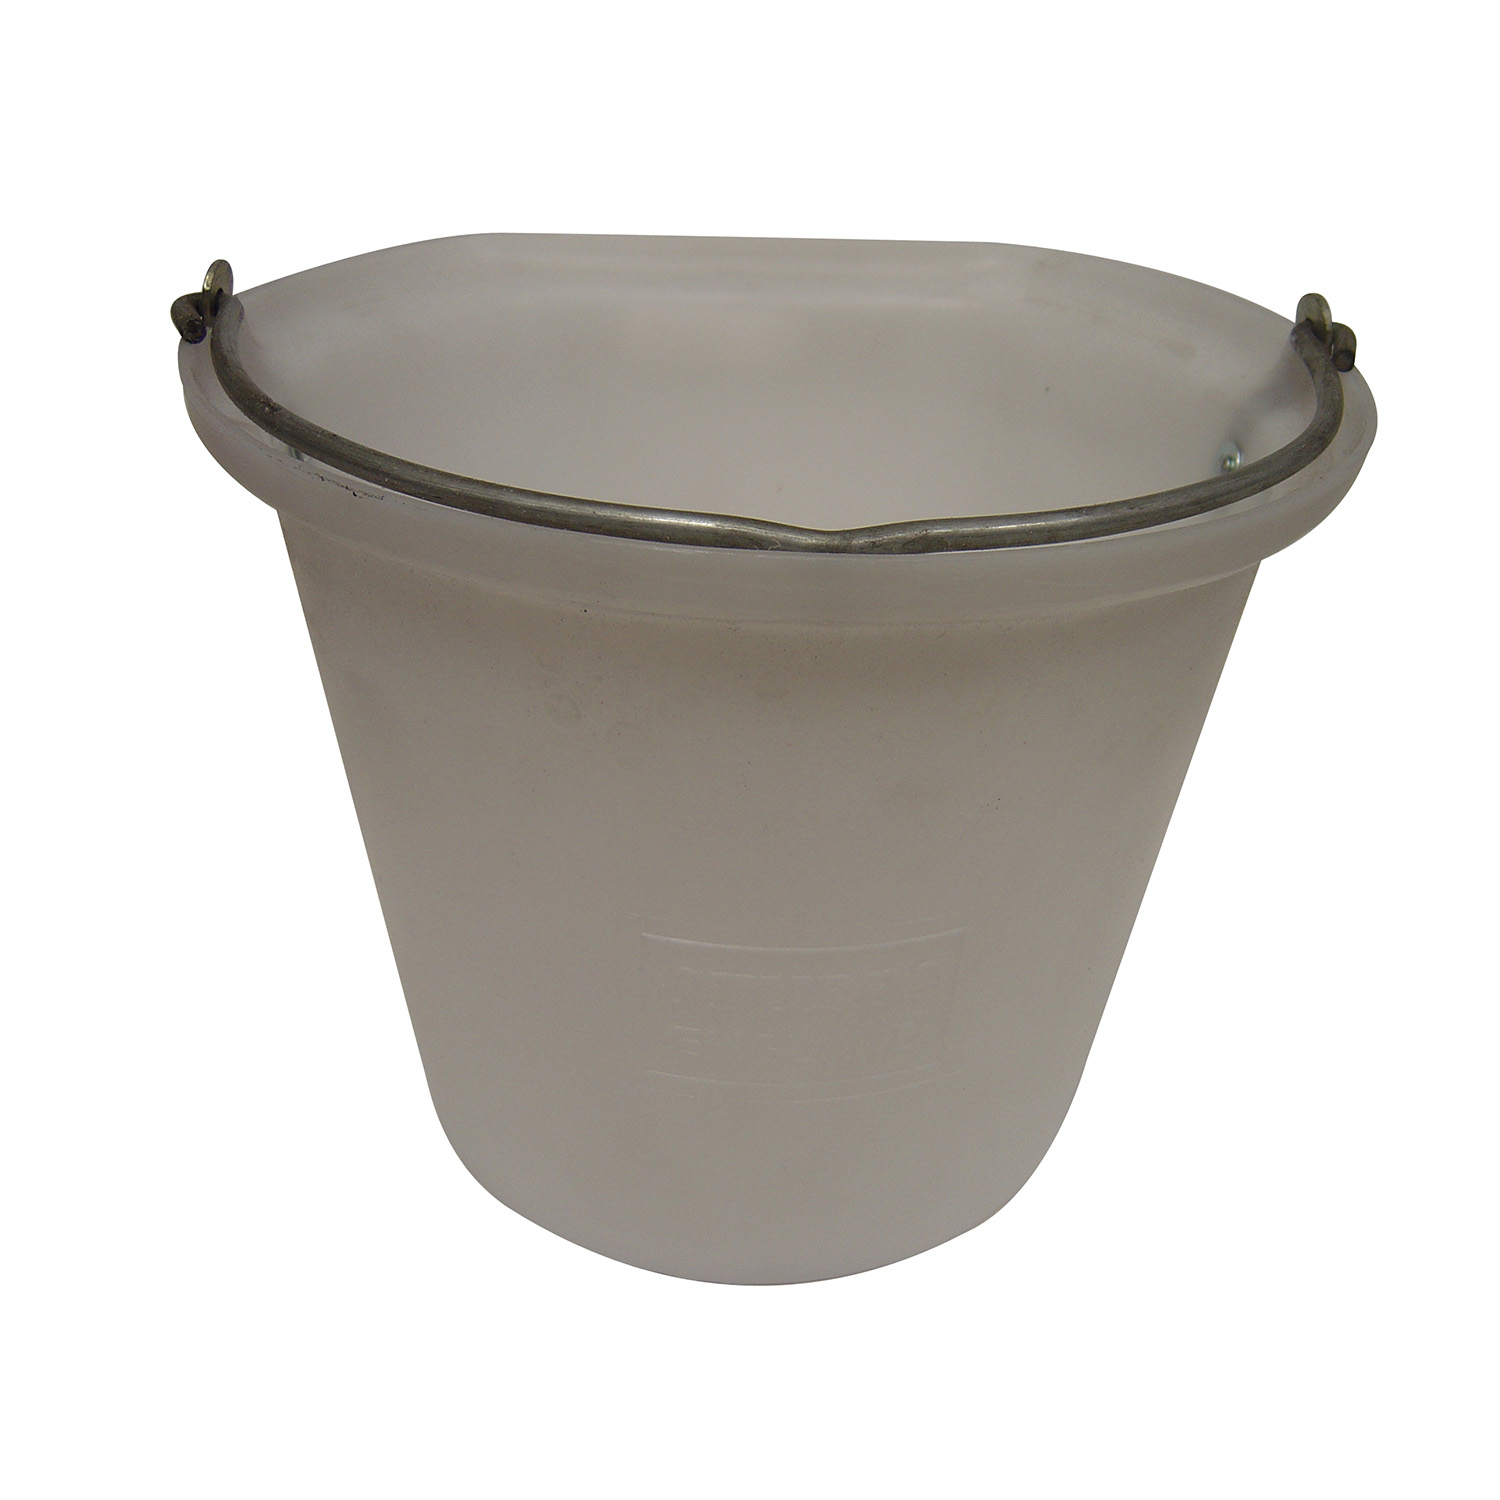 STUBBS HANGING BUCKET FLAT SIDED LARGE 18 LT S85A WHITE 18 LT